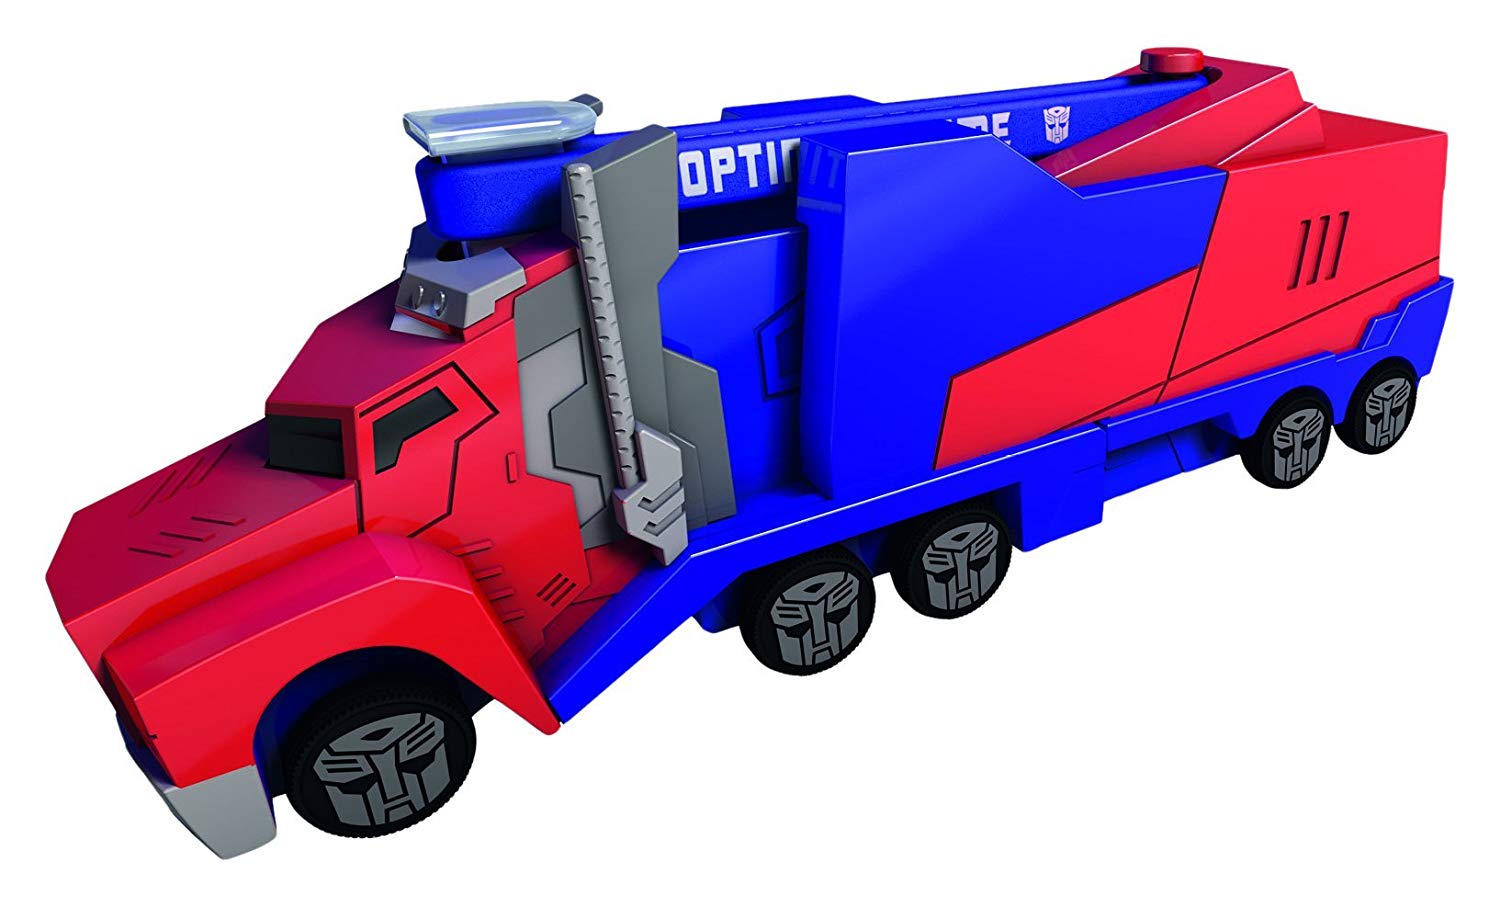 Dickie Toys 203112003 Mission Racer Optimus Prime – Transformers Vehicles, 